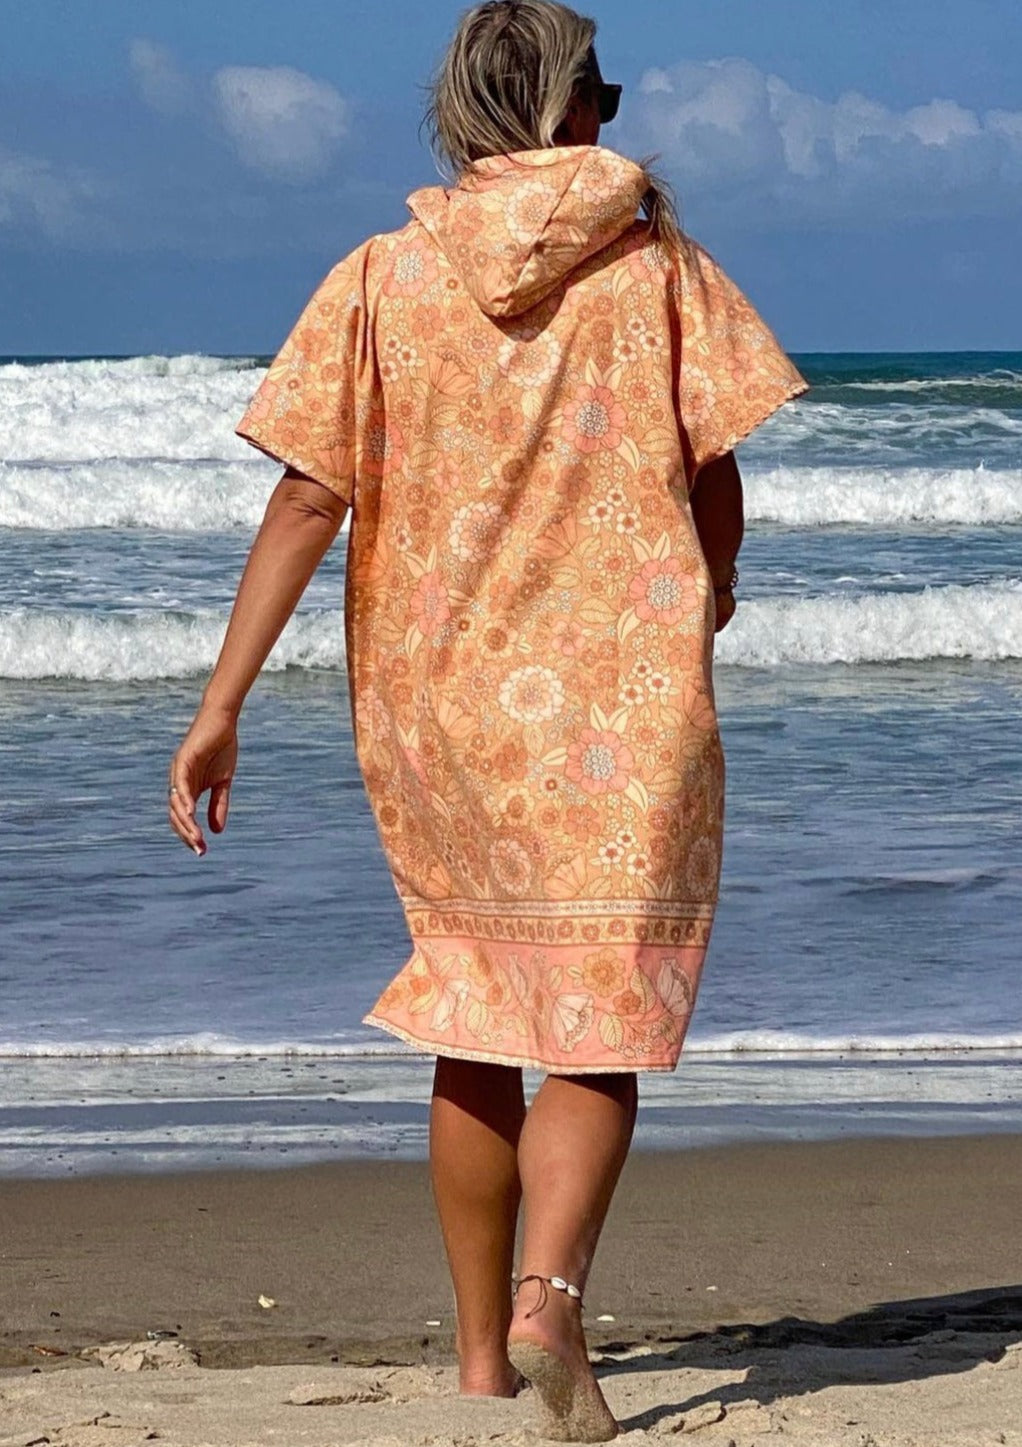 Eco Surf Poncho, Adults - Pink Peony - Pink Peony, by Flock These stunning and soft surf ponchos are made from 85% post-consumer plastic bottles. Recycled plastic bottles are transformed into polyester fabric to be used to create these amazing ponchos. It takes up to 14 plastic bottles to make one poncho, ultimately preventing these plastic bottles from ending up in landfills or our oceans.